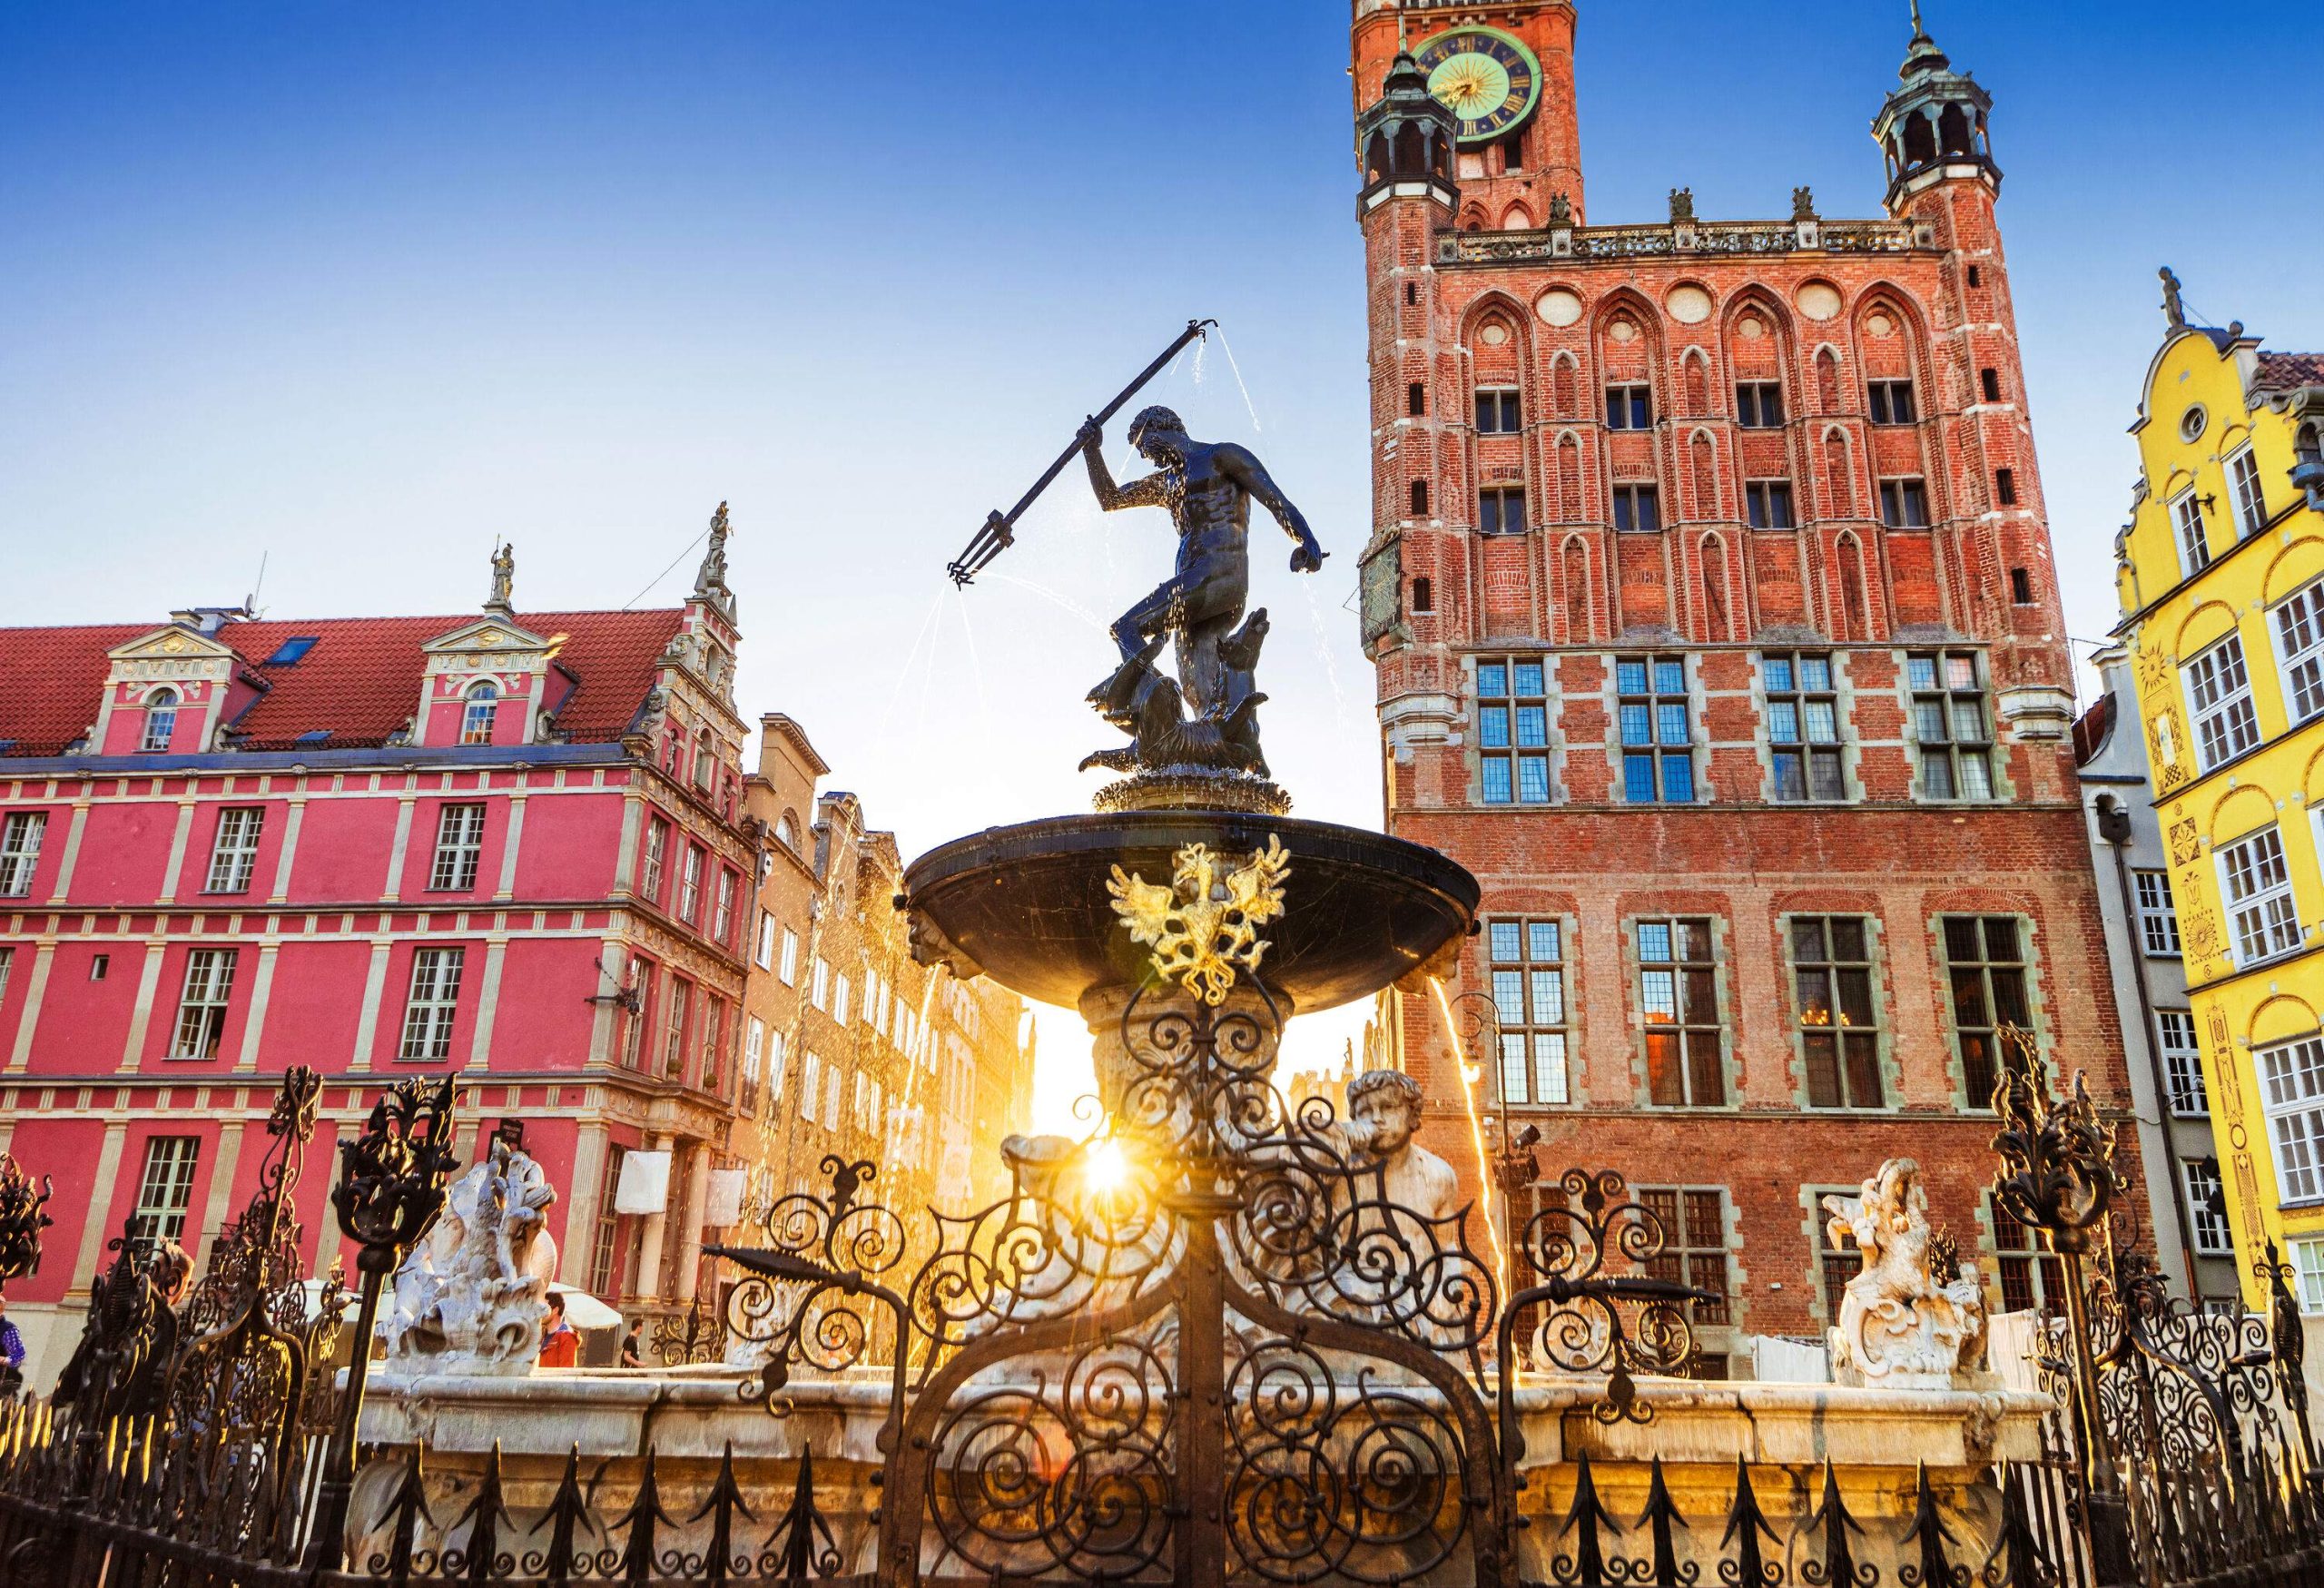 A beautiful fountain with statues in the centre of a city square surrounded by colourful and classical buildings.